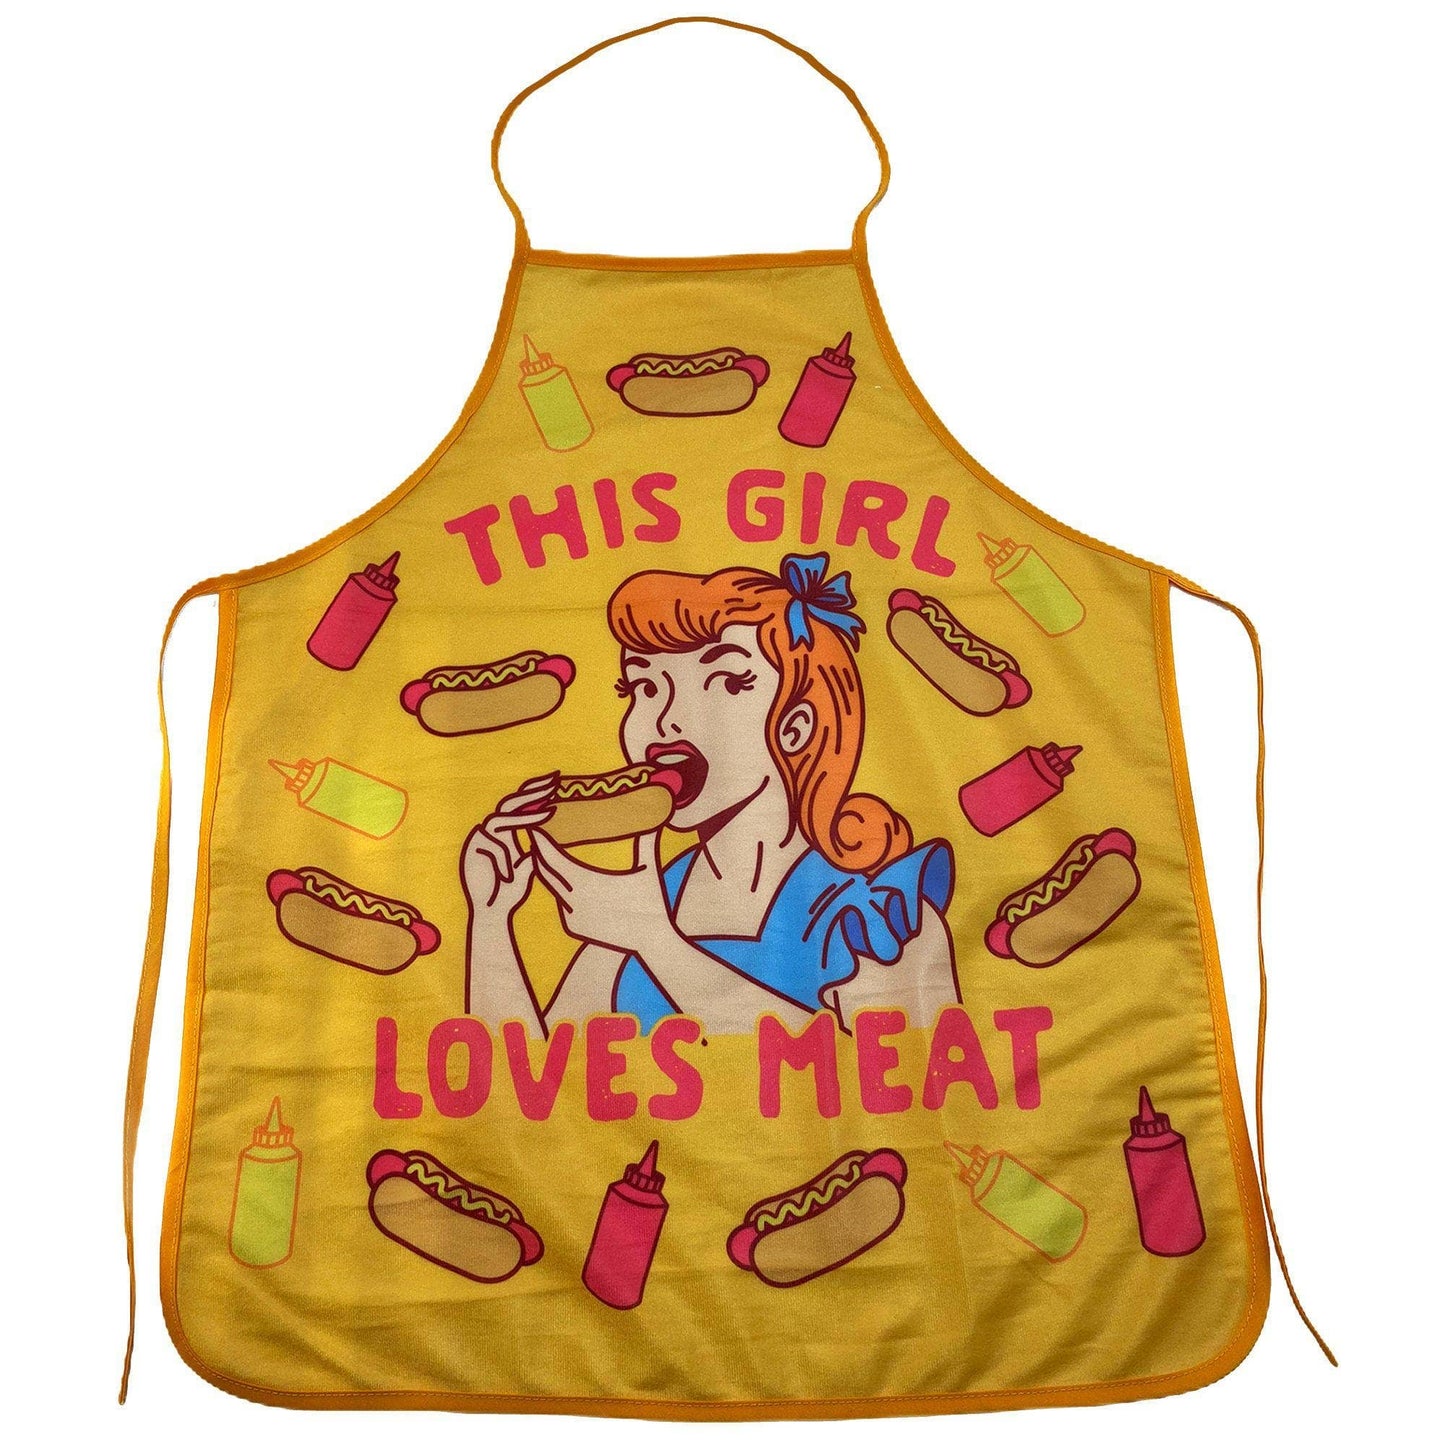 This Girl Loves Meat Apron Hilarious Novelty Gift Idea